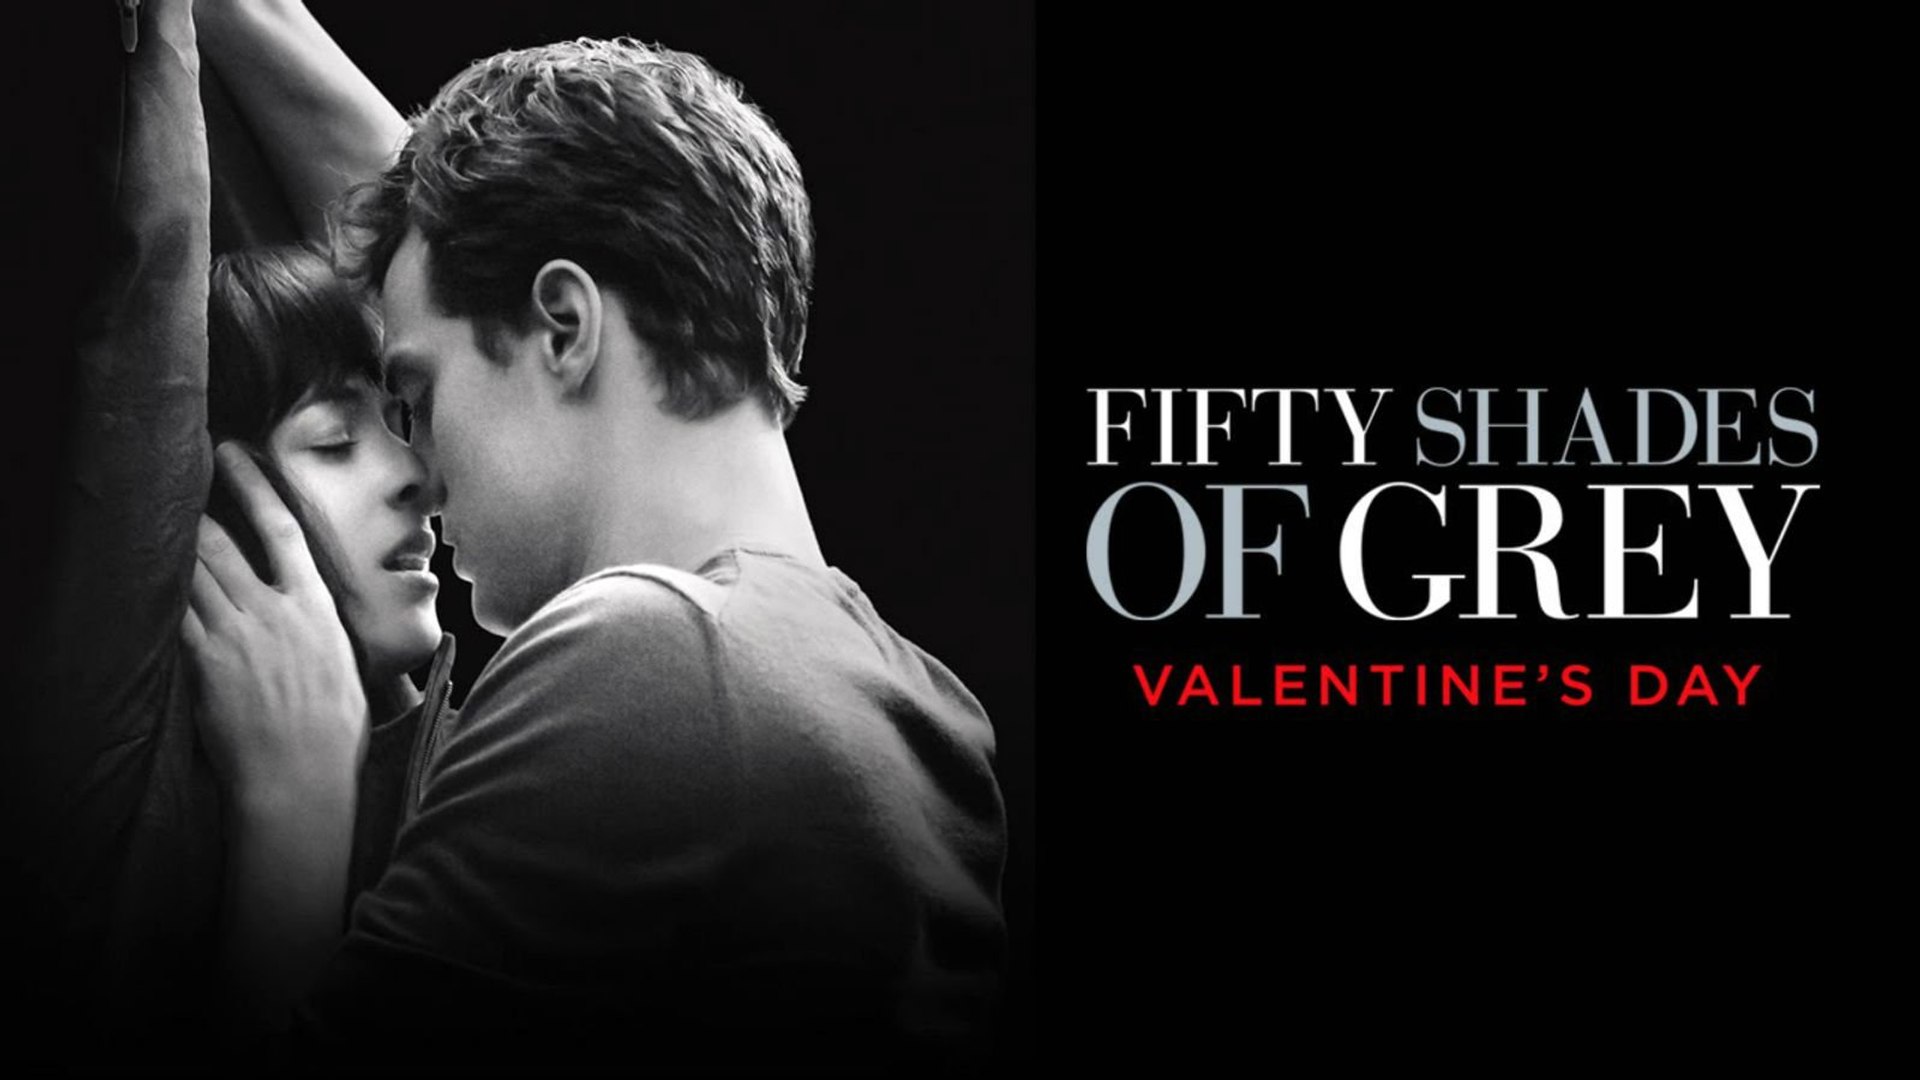 Fifty Shades Of Grey 3 Full Movie Online Watch Free Dailymotion